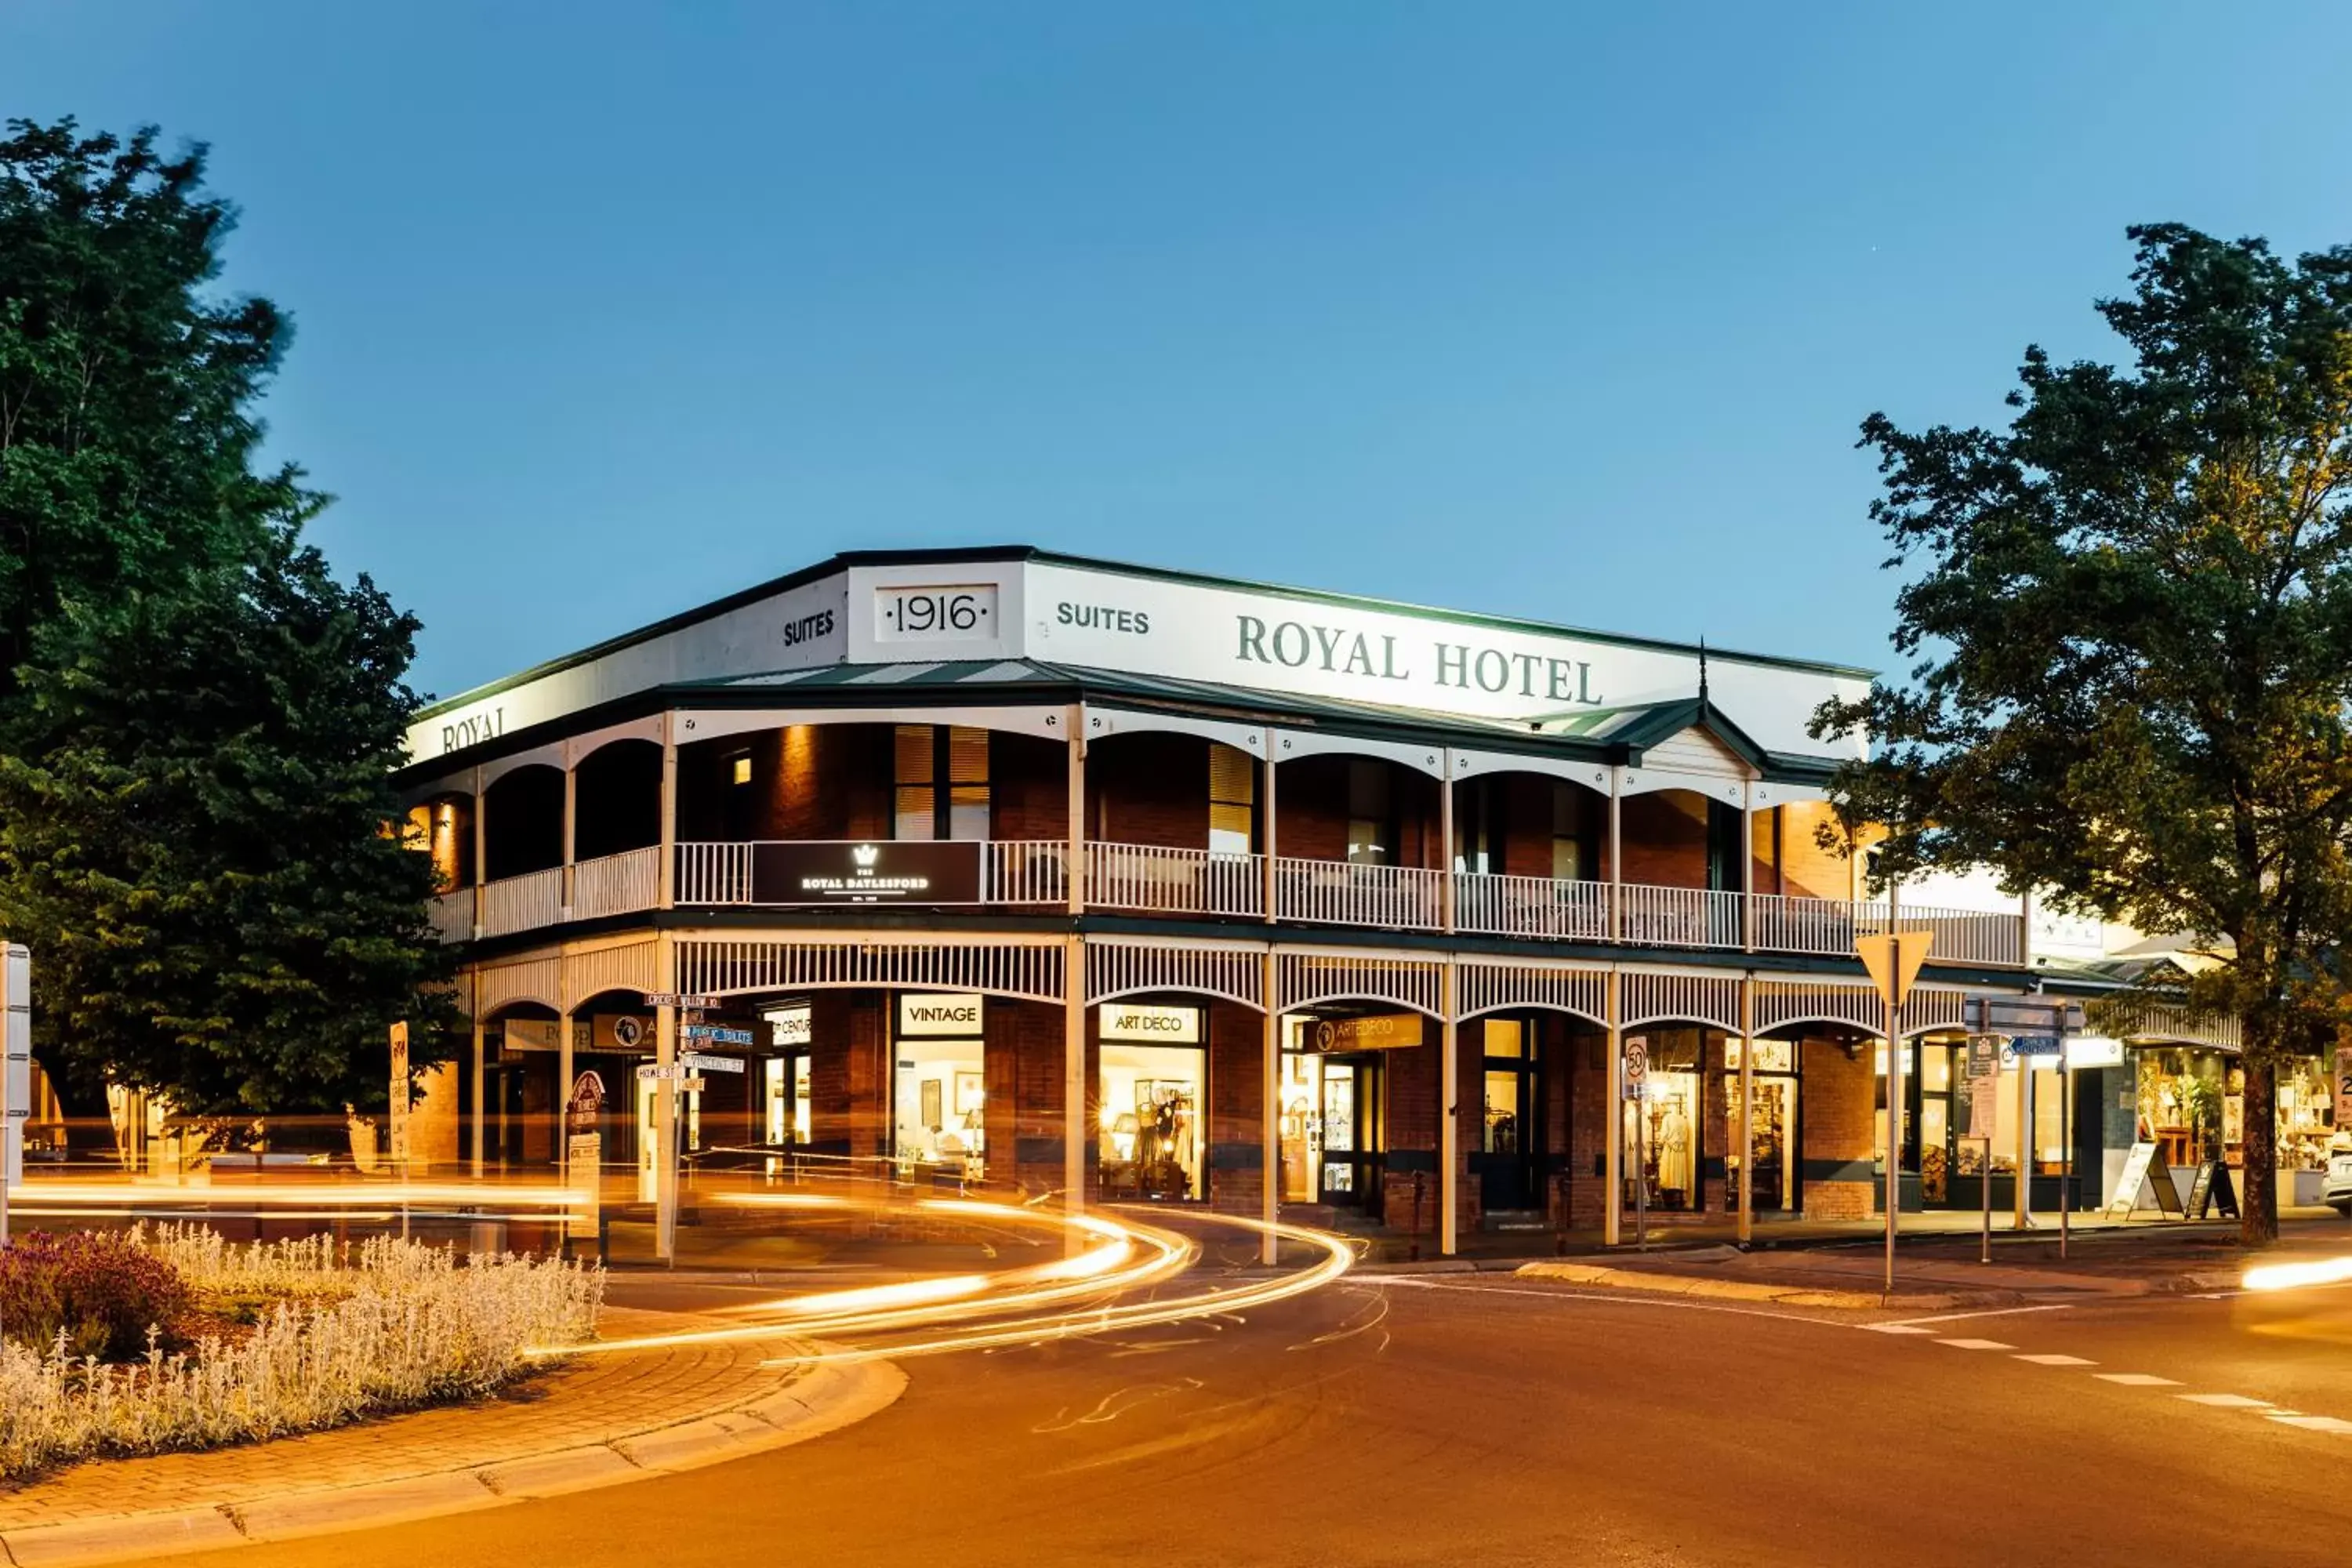 Property building in The Royal Daylesford Hotel